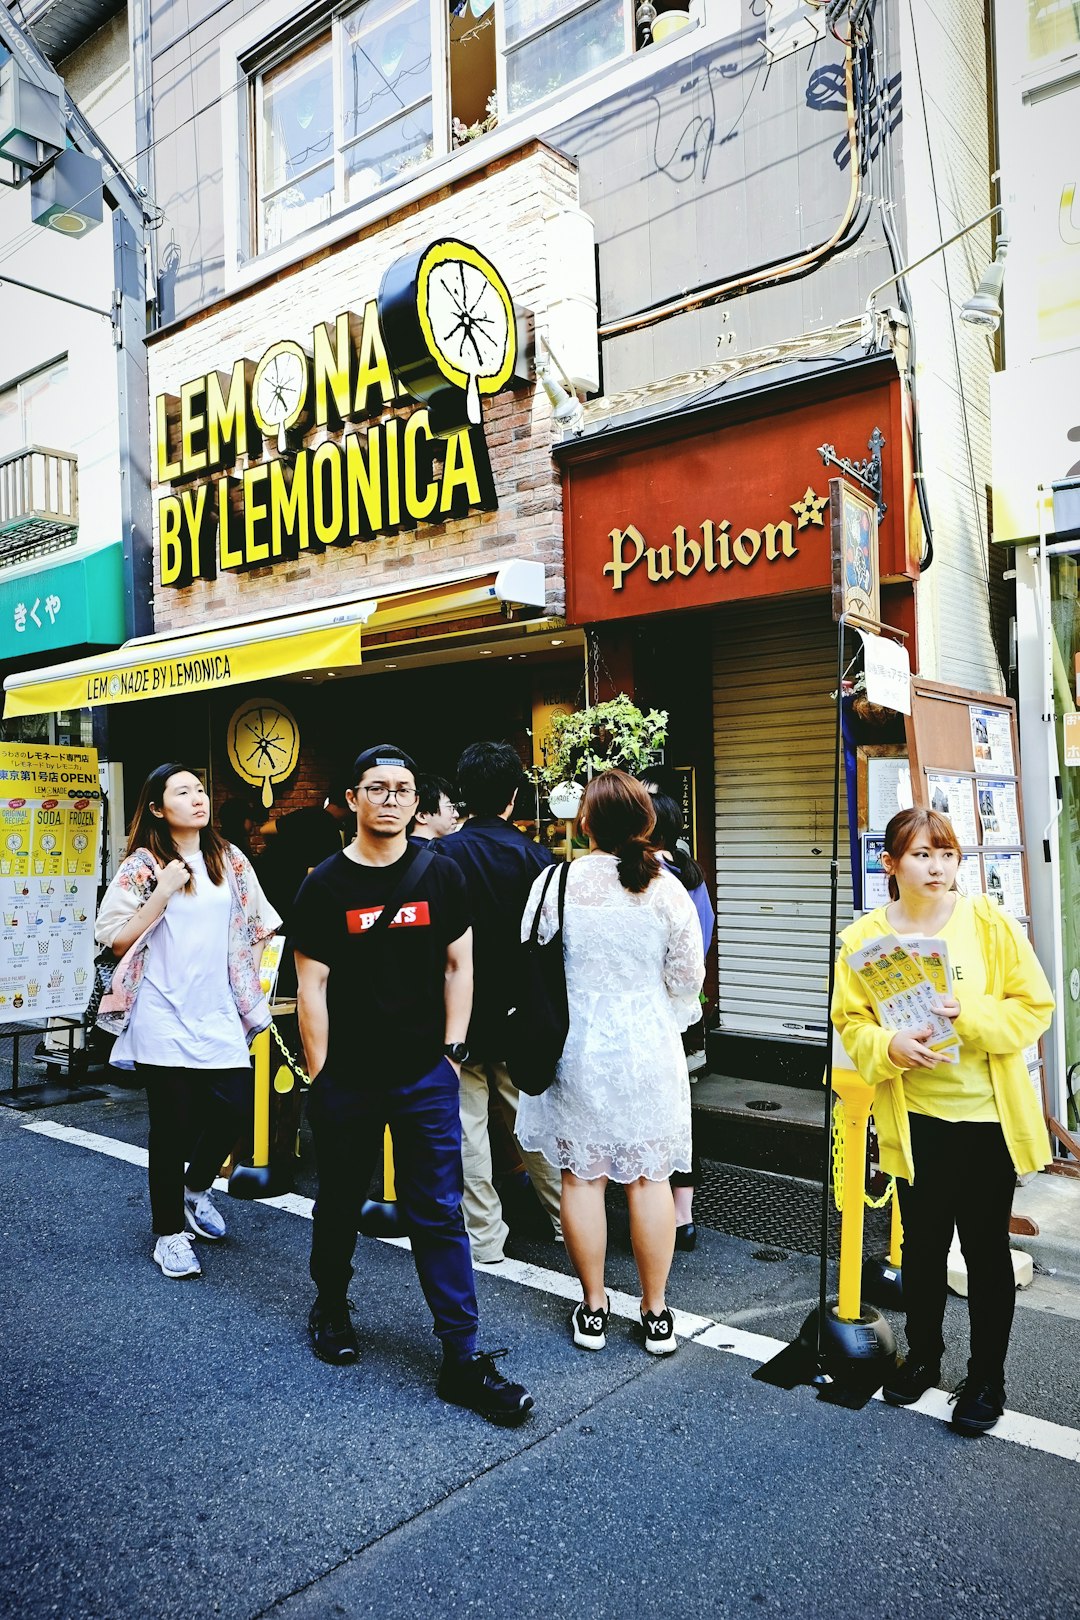 group of people standing on street during daytime